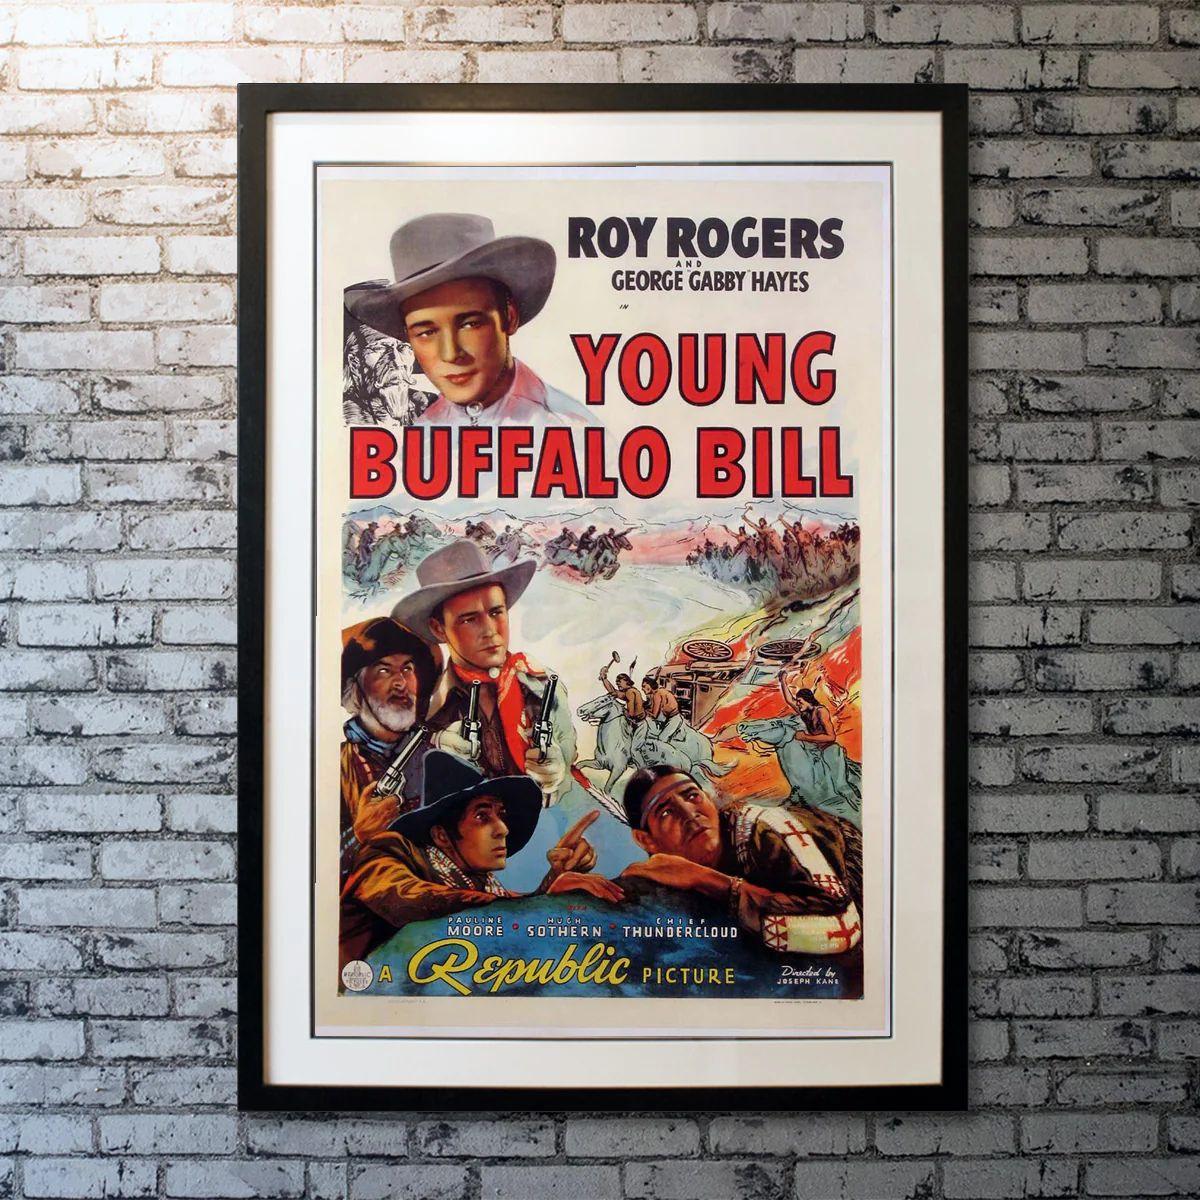 Young Buffalo Bill, Unframed Poster, 1940

Original US 1 Sheet (27 X 41 Inches). Buffalo Bill, who bears virtually no relation to the real one, gets in a fight over mining lands in New Mexico. Indians besiege a Spanish rancho and the U.S. Cavalry